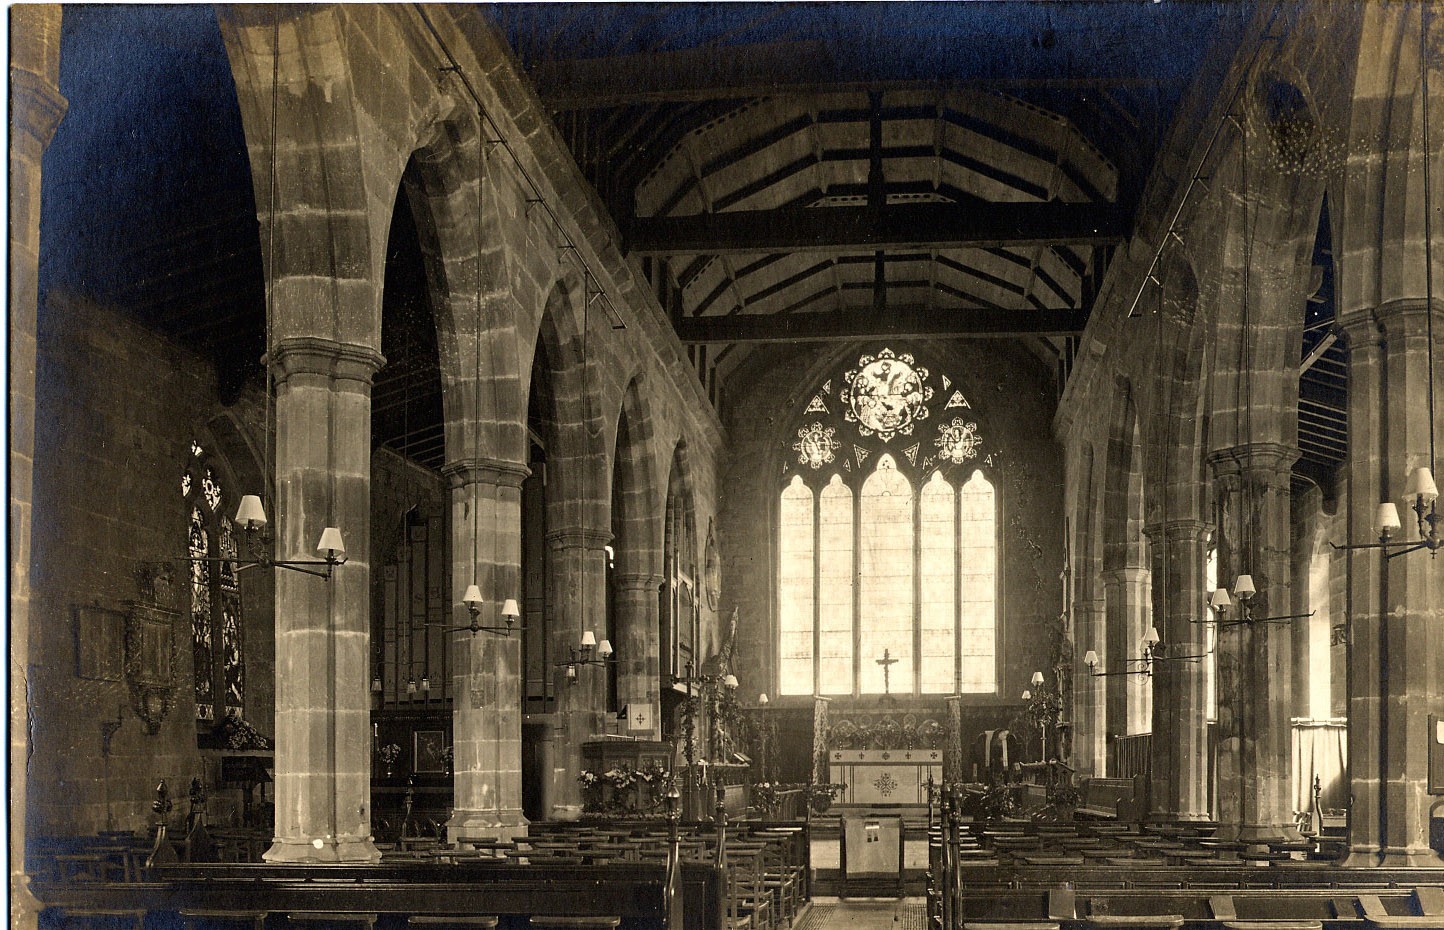 The interior of St Helen’s Church, which hosted a flourishing Sunday School in the late 1700s